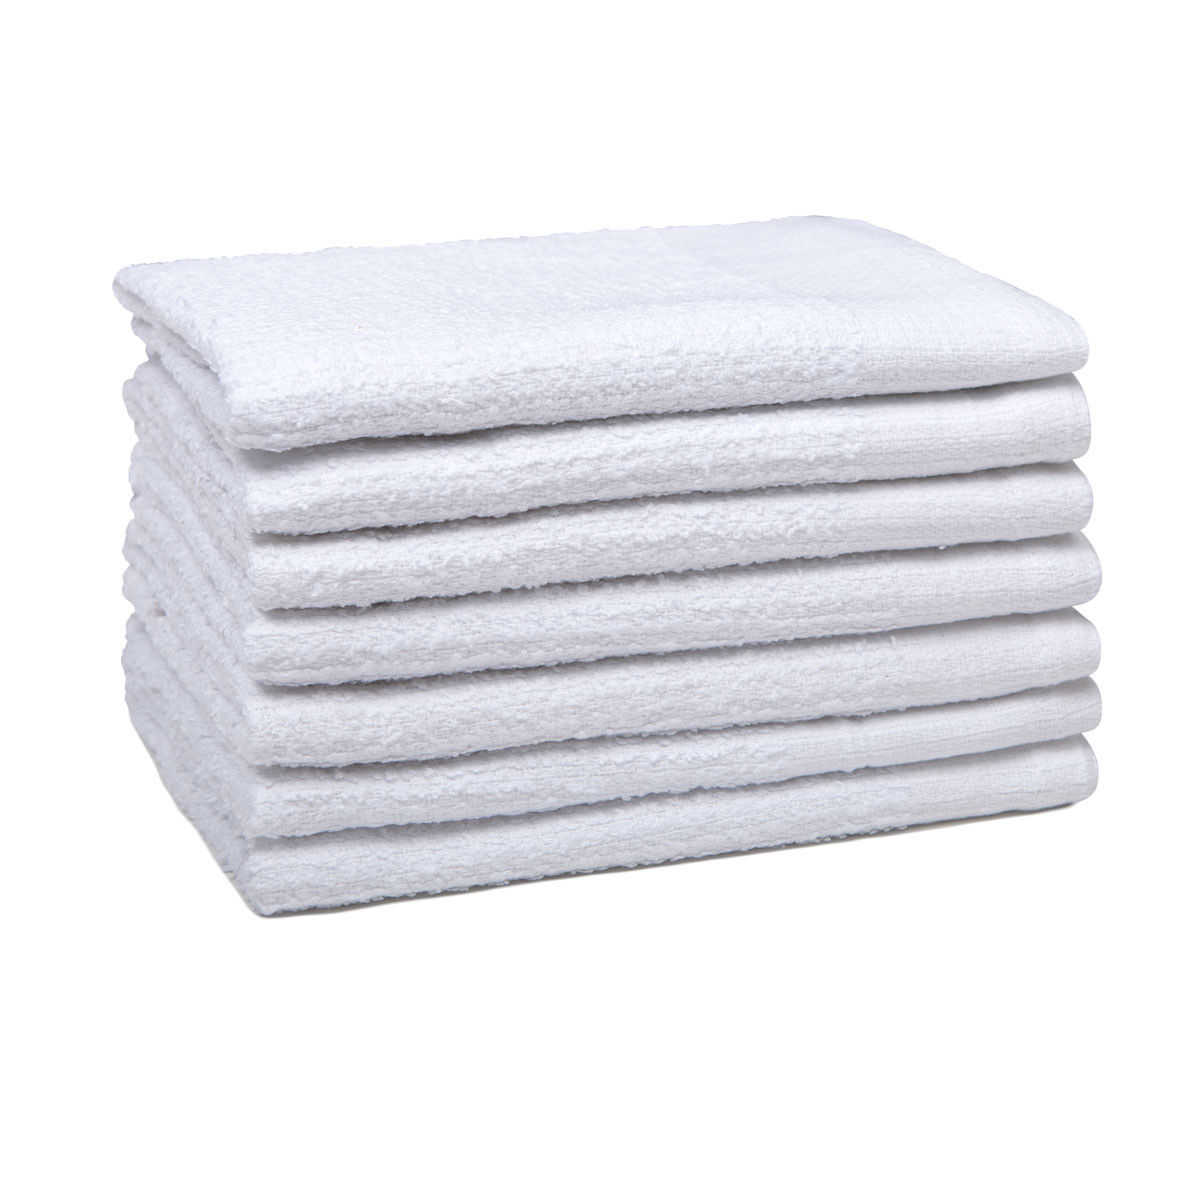 What benefits do the Super constructions bring to the bar towels?